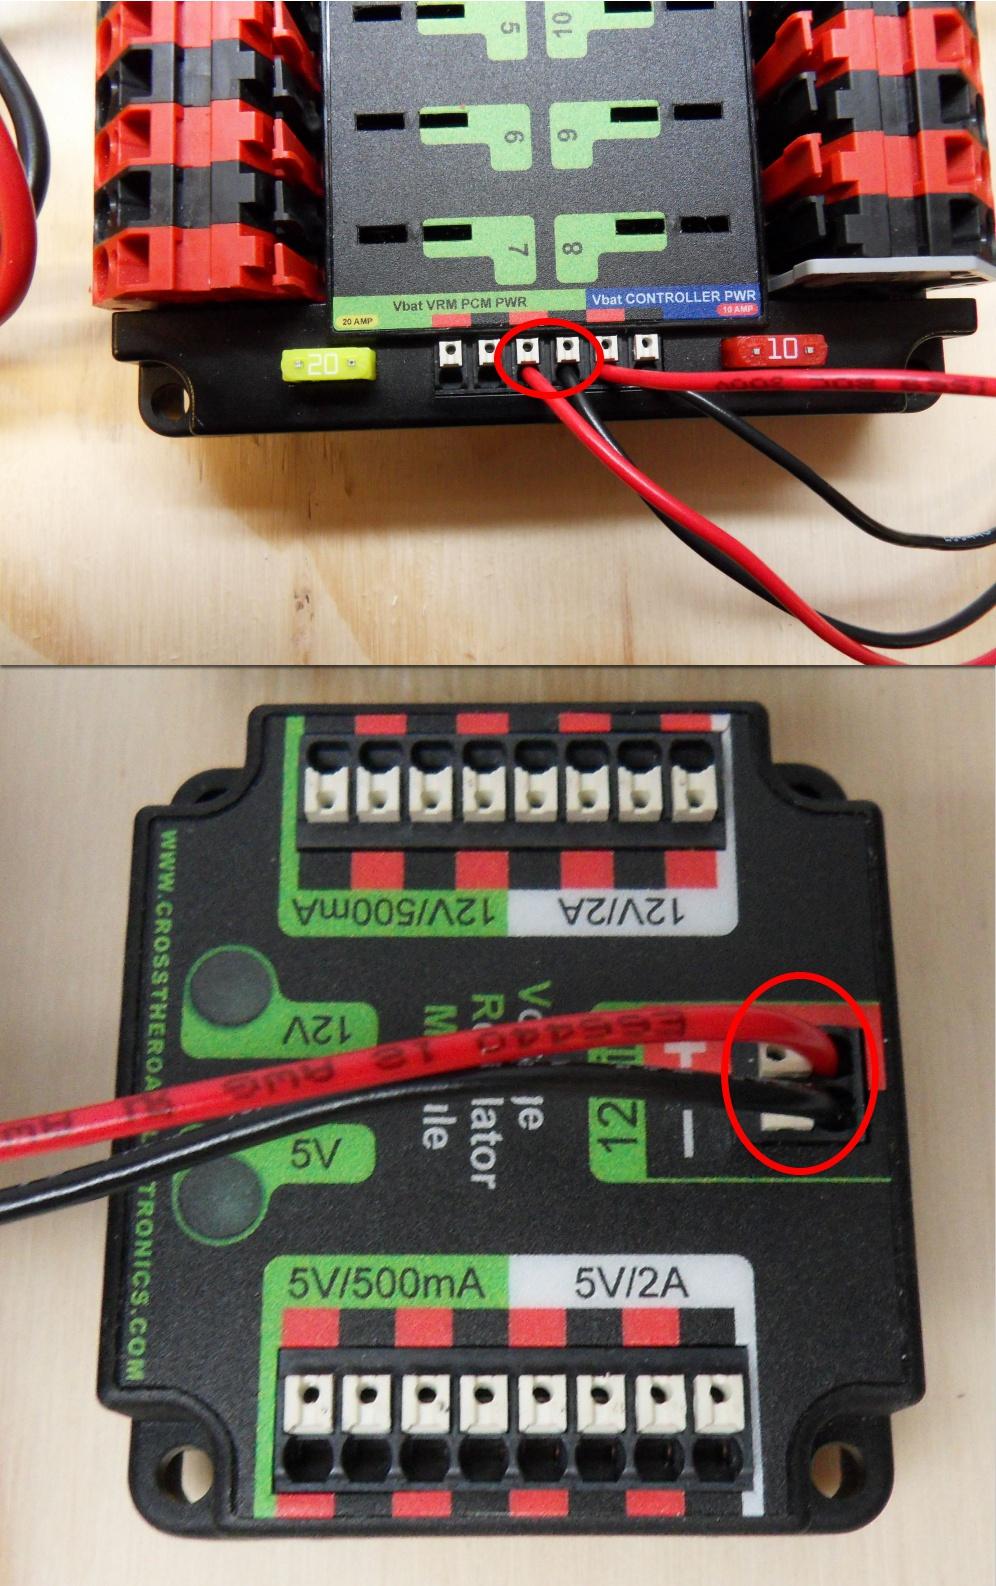 2. Strip ~5/16" on both the red and black 18AWG wire and connect to the "Vbat Controller PWR" terminals on the PDB 3. Measure the required length to reach the power input on the roborio.